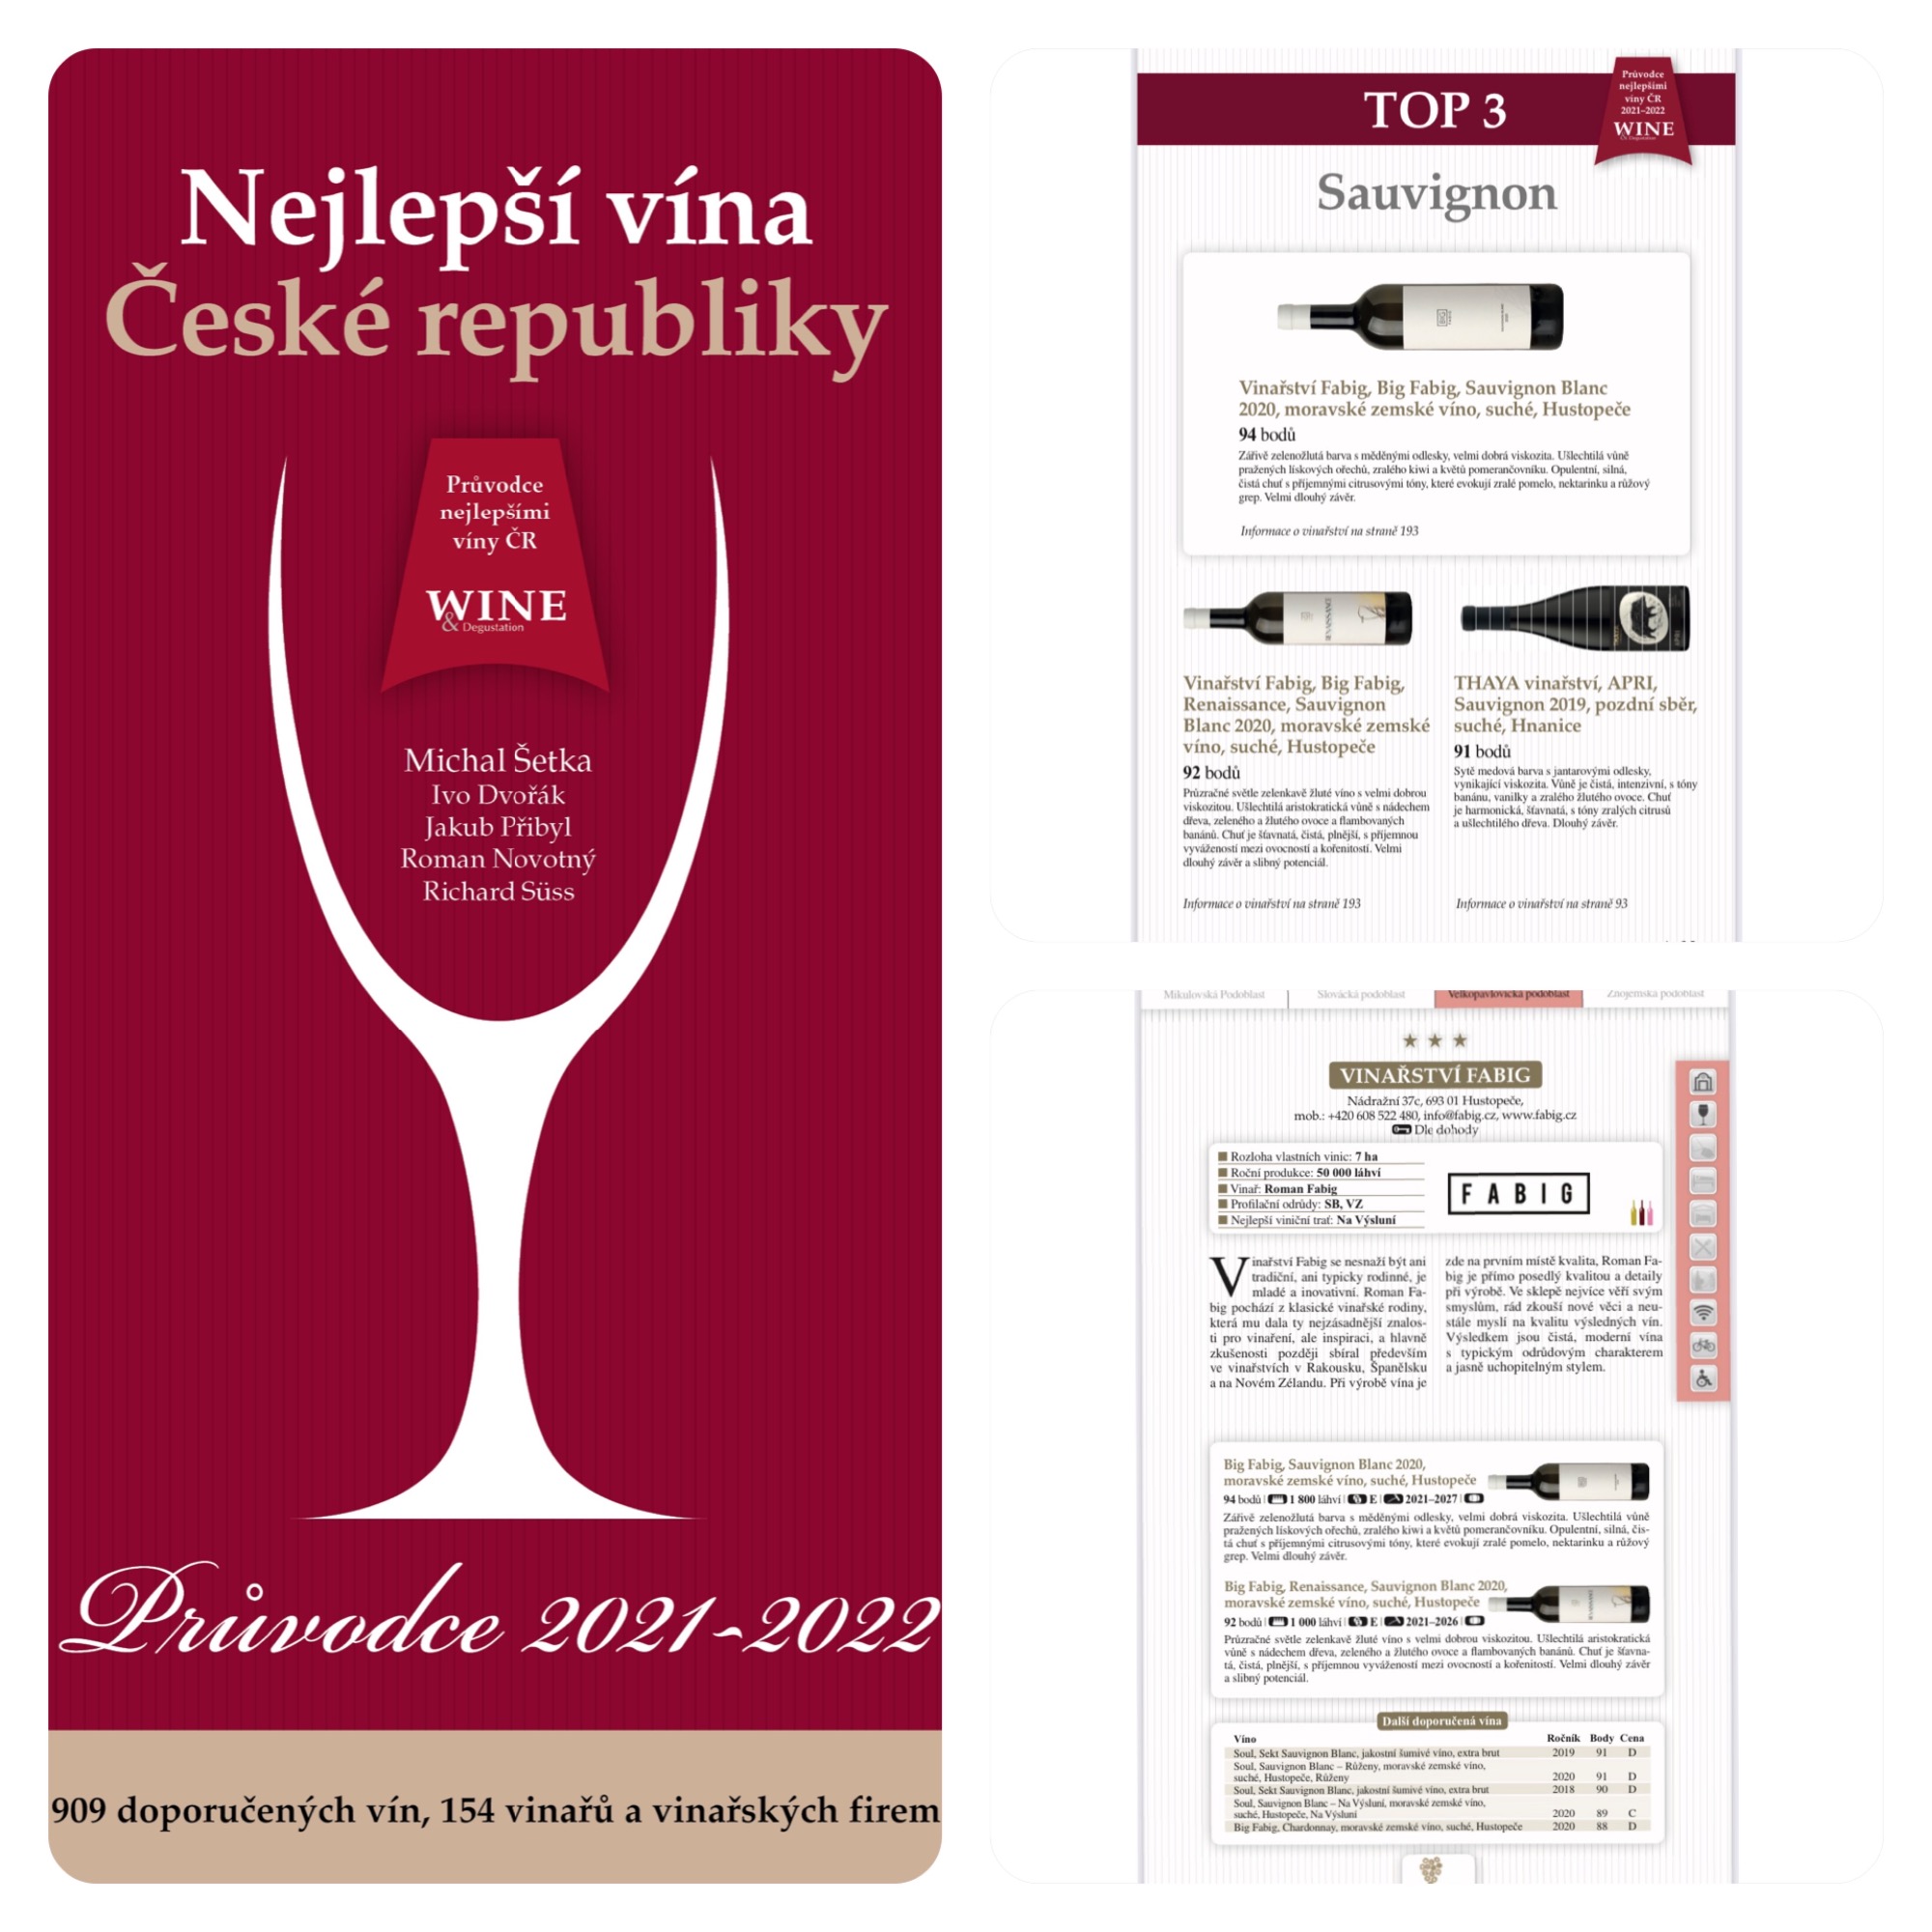 The new edition of the Guide to the best wines of the Czech Republic has just arrived!